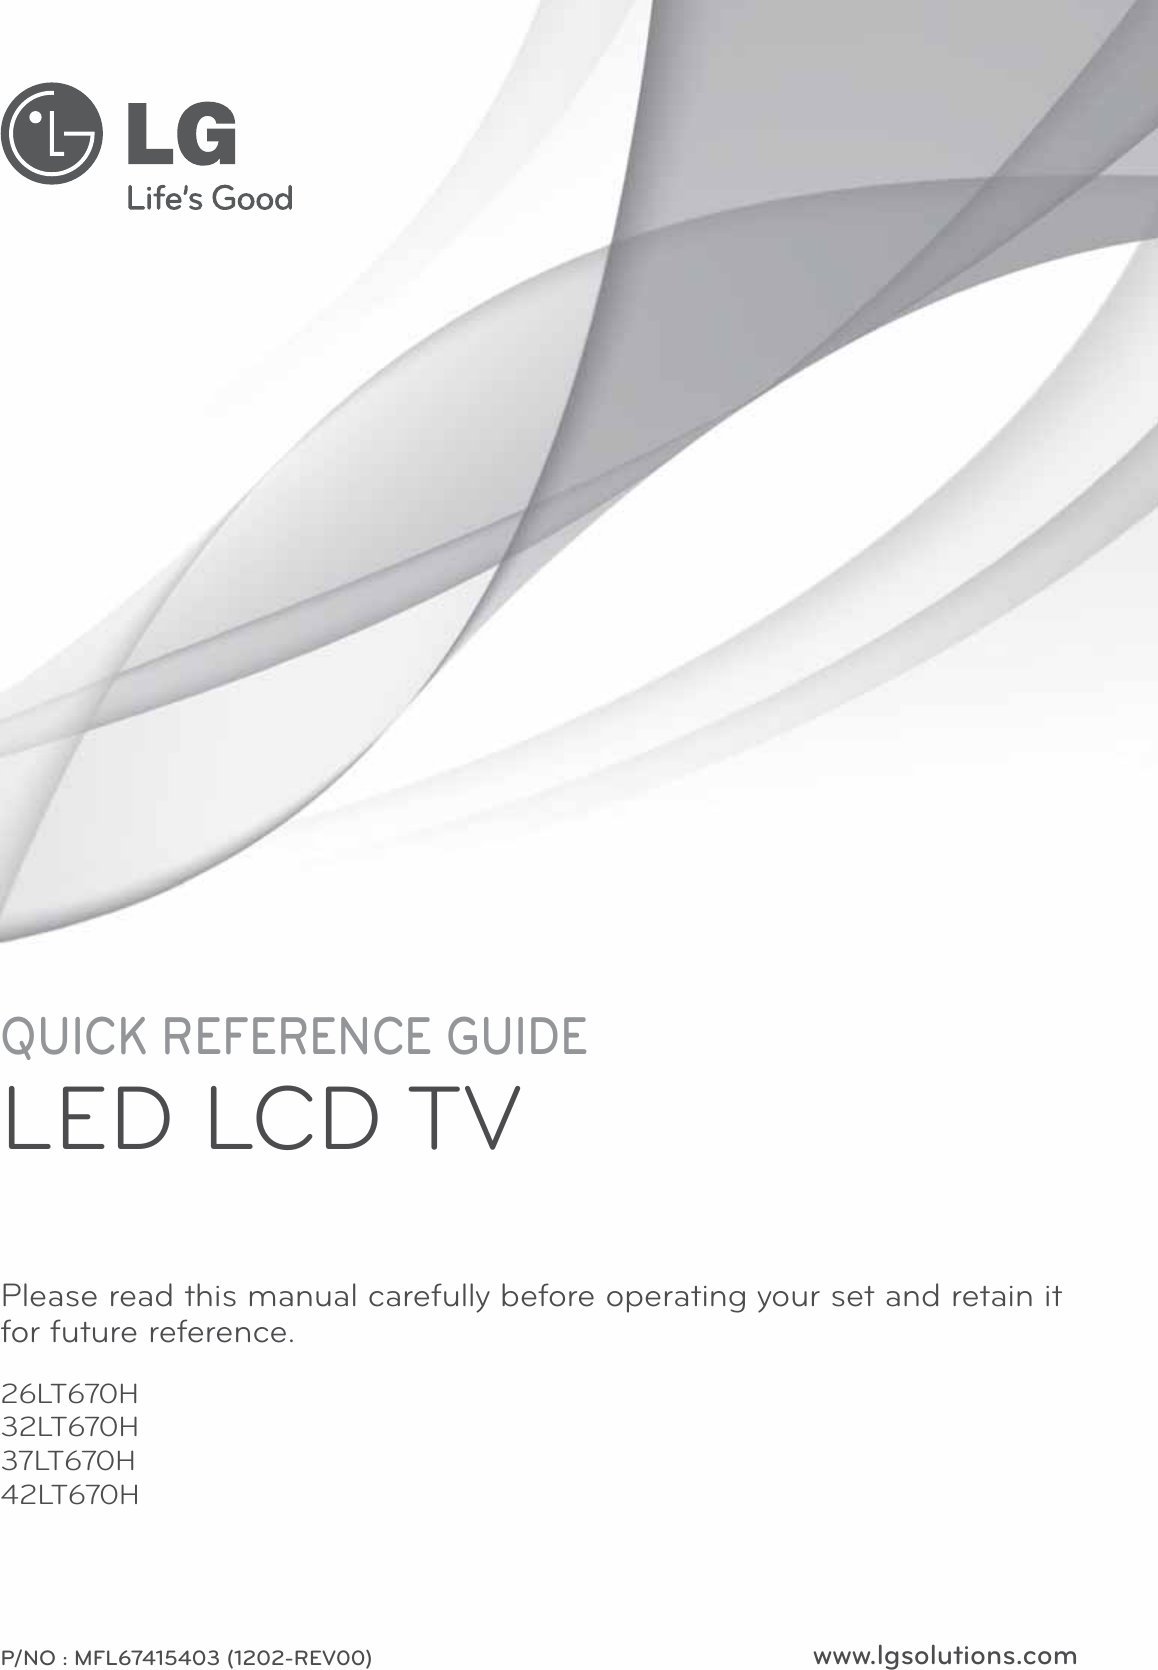 www.lgsolutions.comQUICK REFERENCE GUIDELED LCD TVPlease read this manual carefully before operating your set and retain it for future reference.26LT670H32LT670H37LT670H42LT670HP/NO : MFL67415403 (1202-REV00)